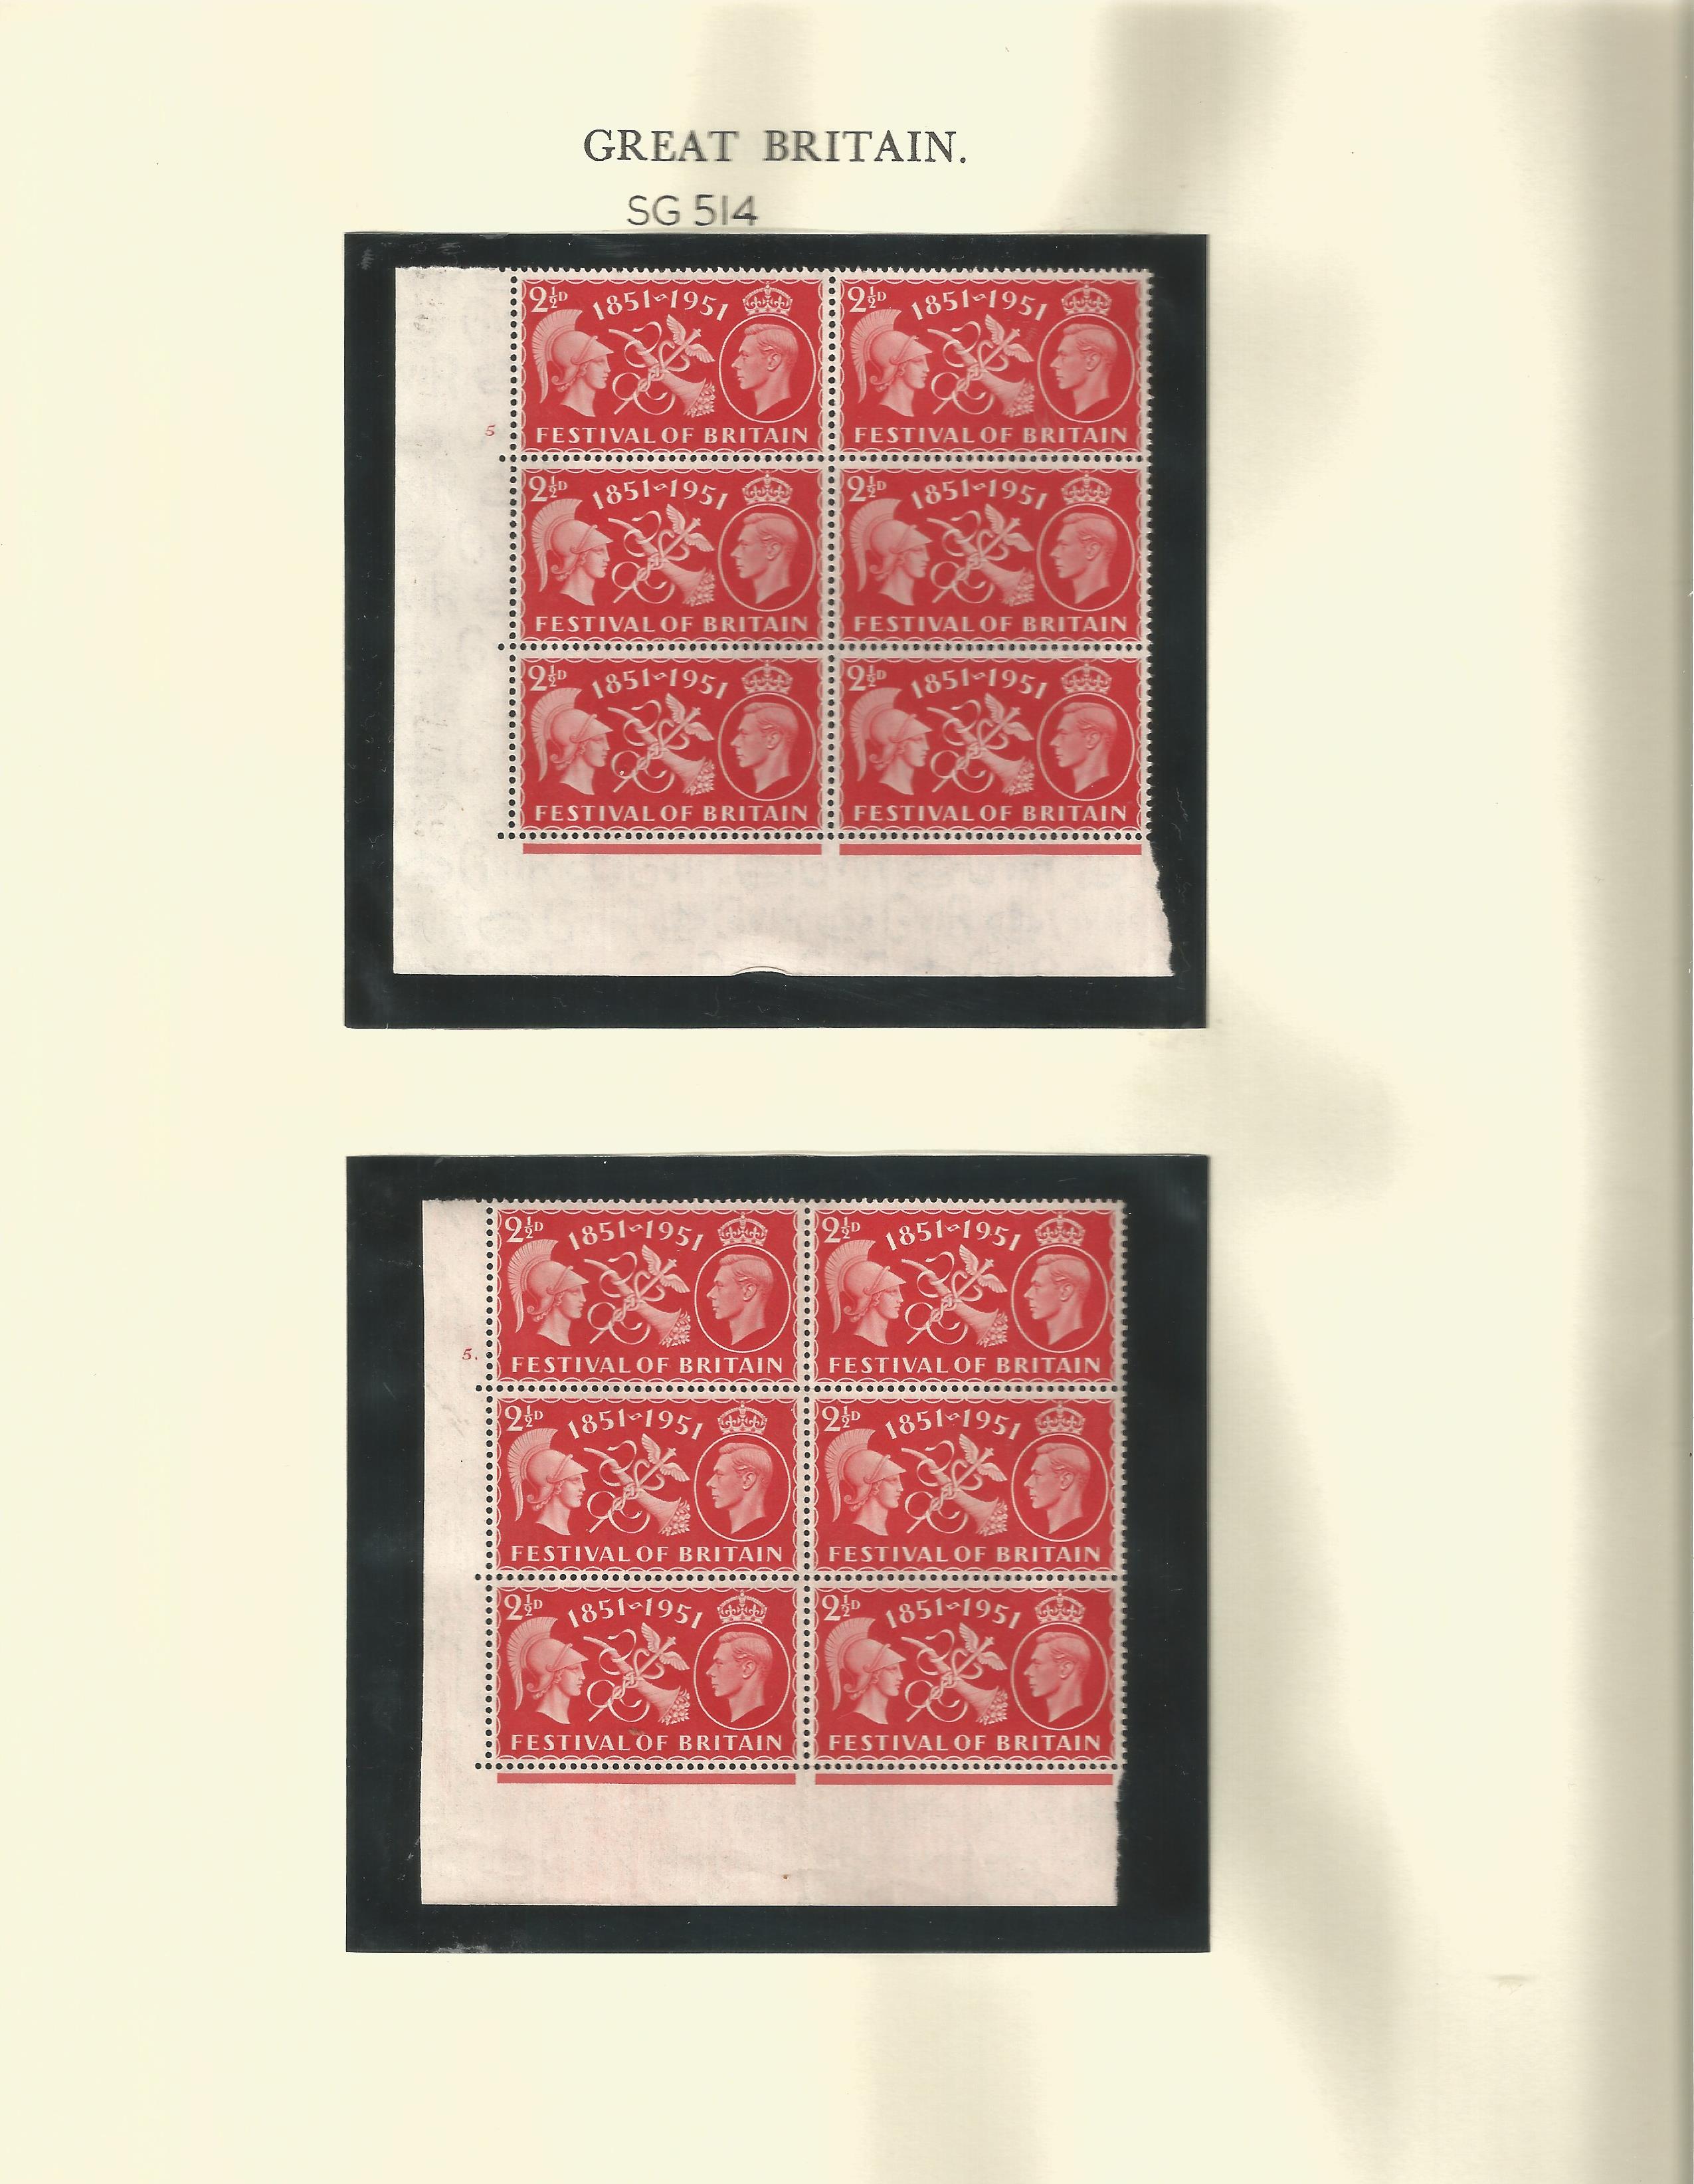 GB Mint Stamps Festival of Britain, SG 513, 4 x Cylinder Block set of 6 Stamps 12 x Two and half